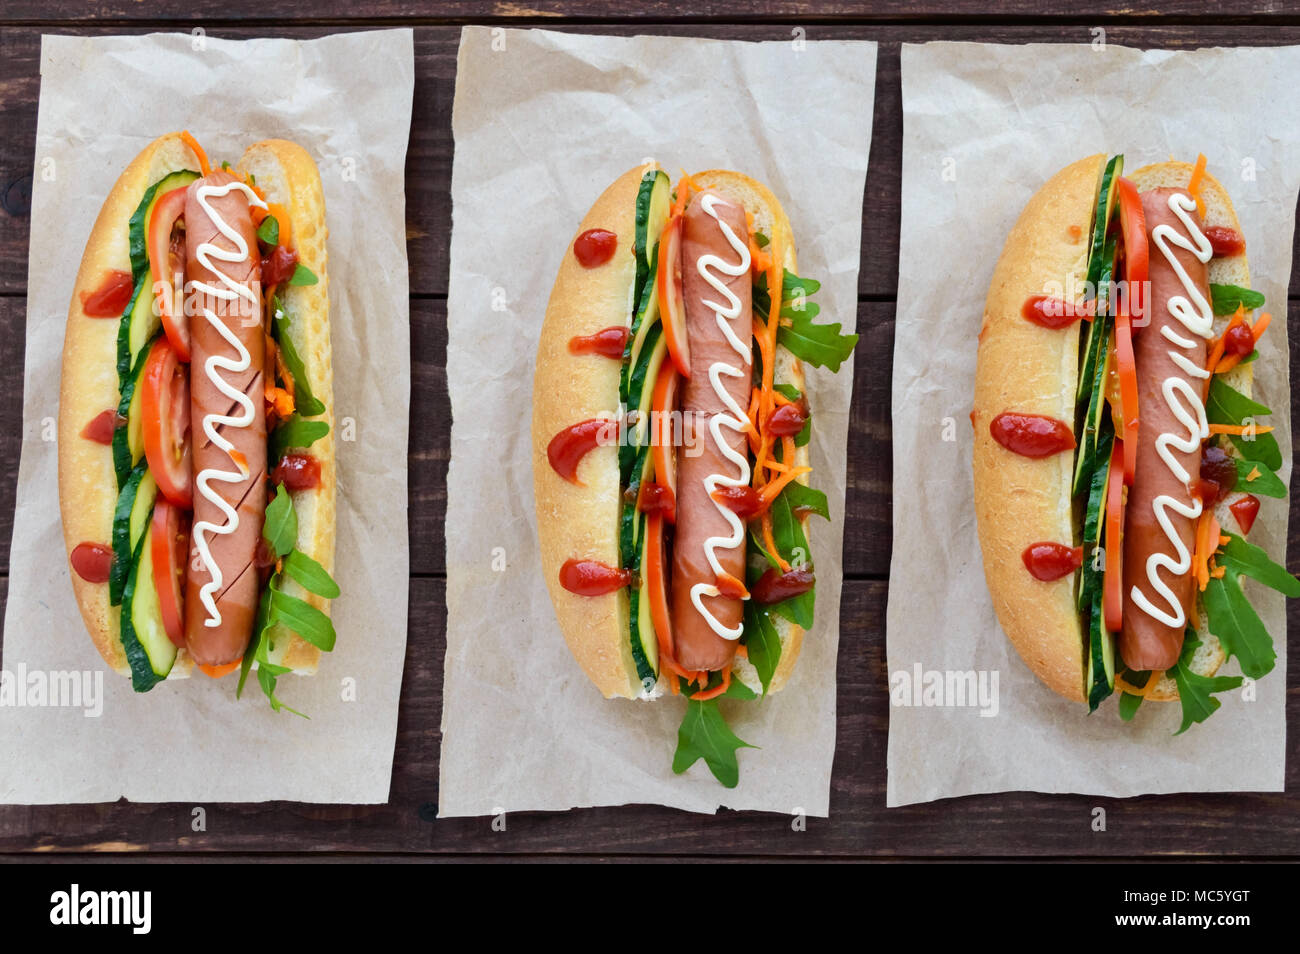 Home made hot dogs with vegetables, juicy sausage and arugula on the wooden background. The top view Stock Photo